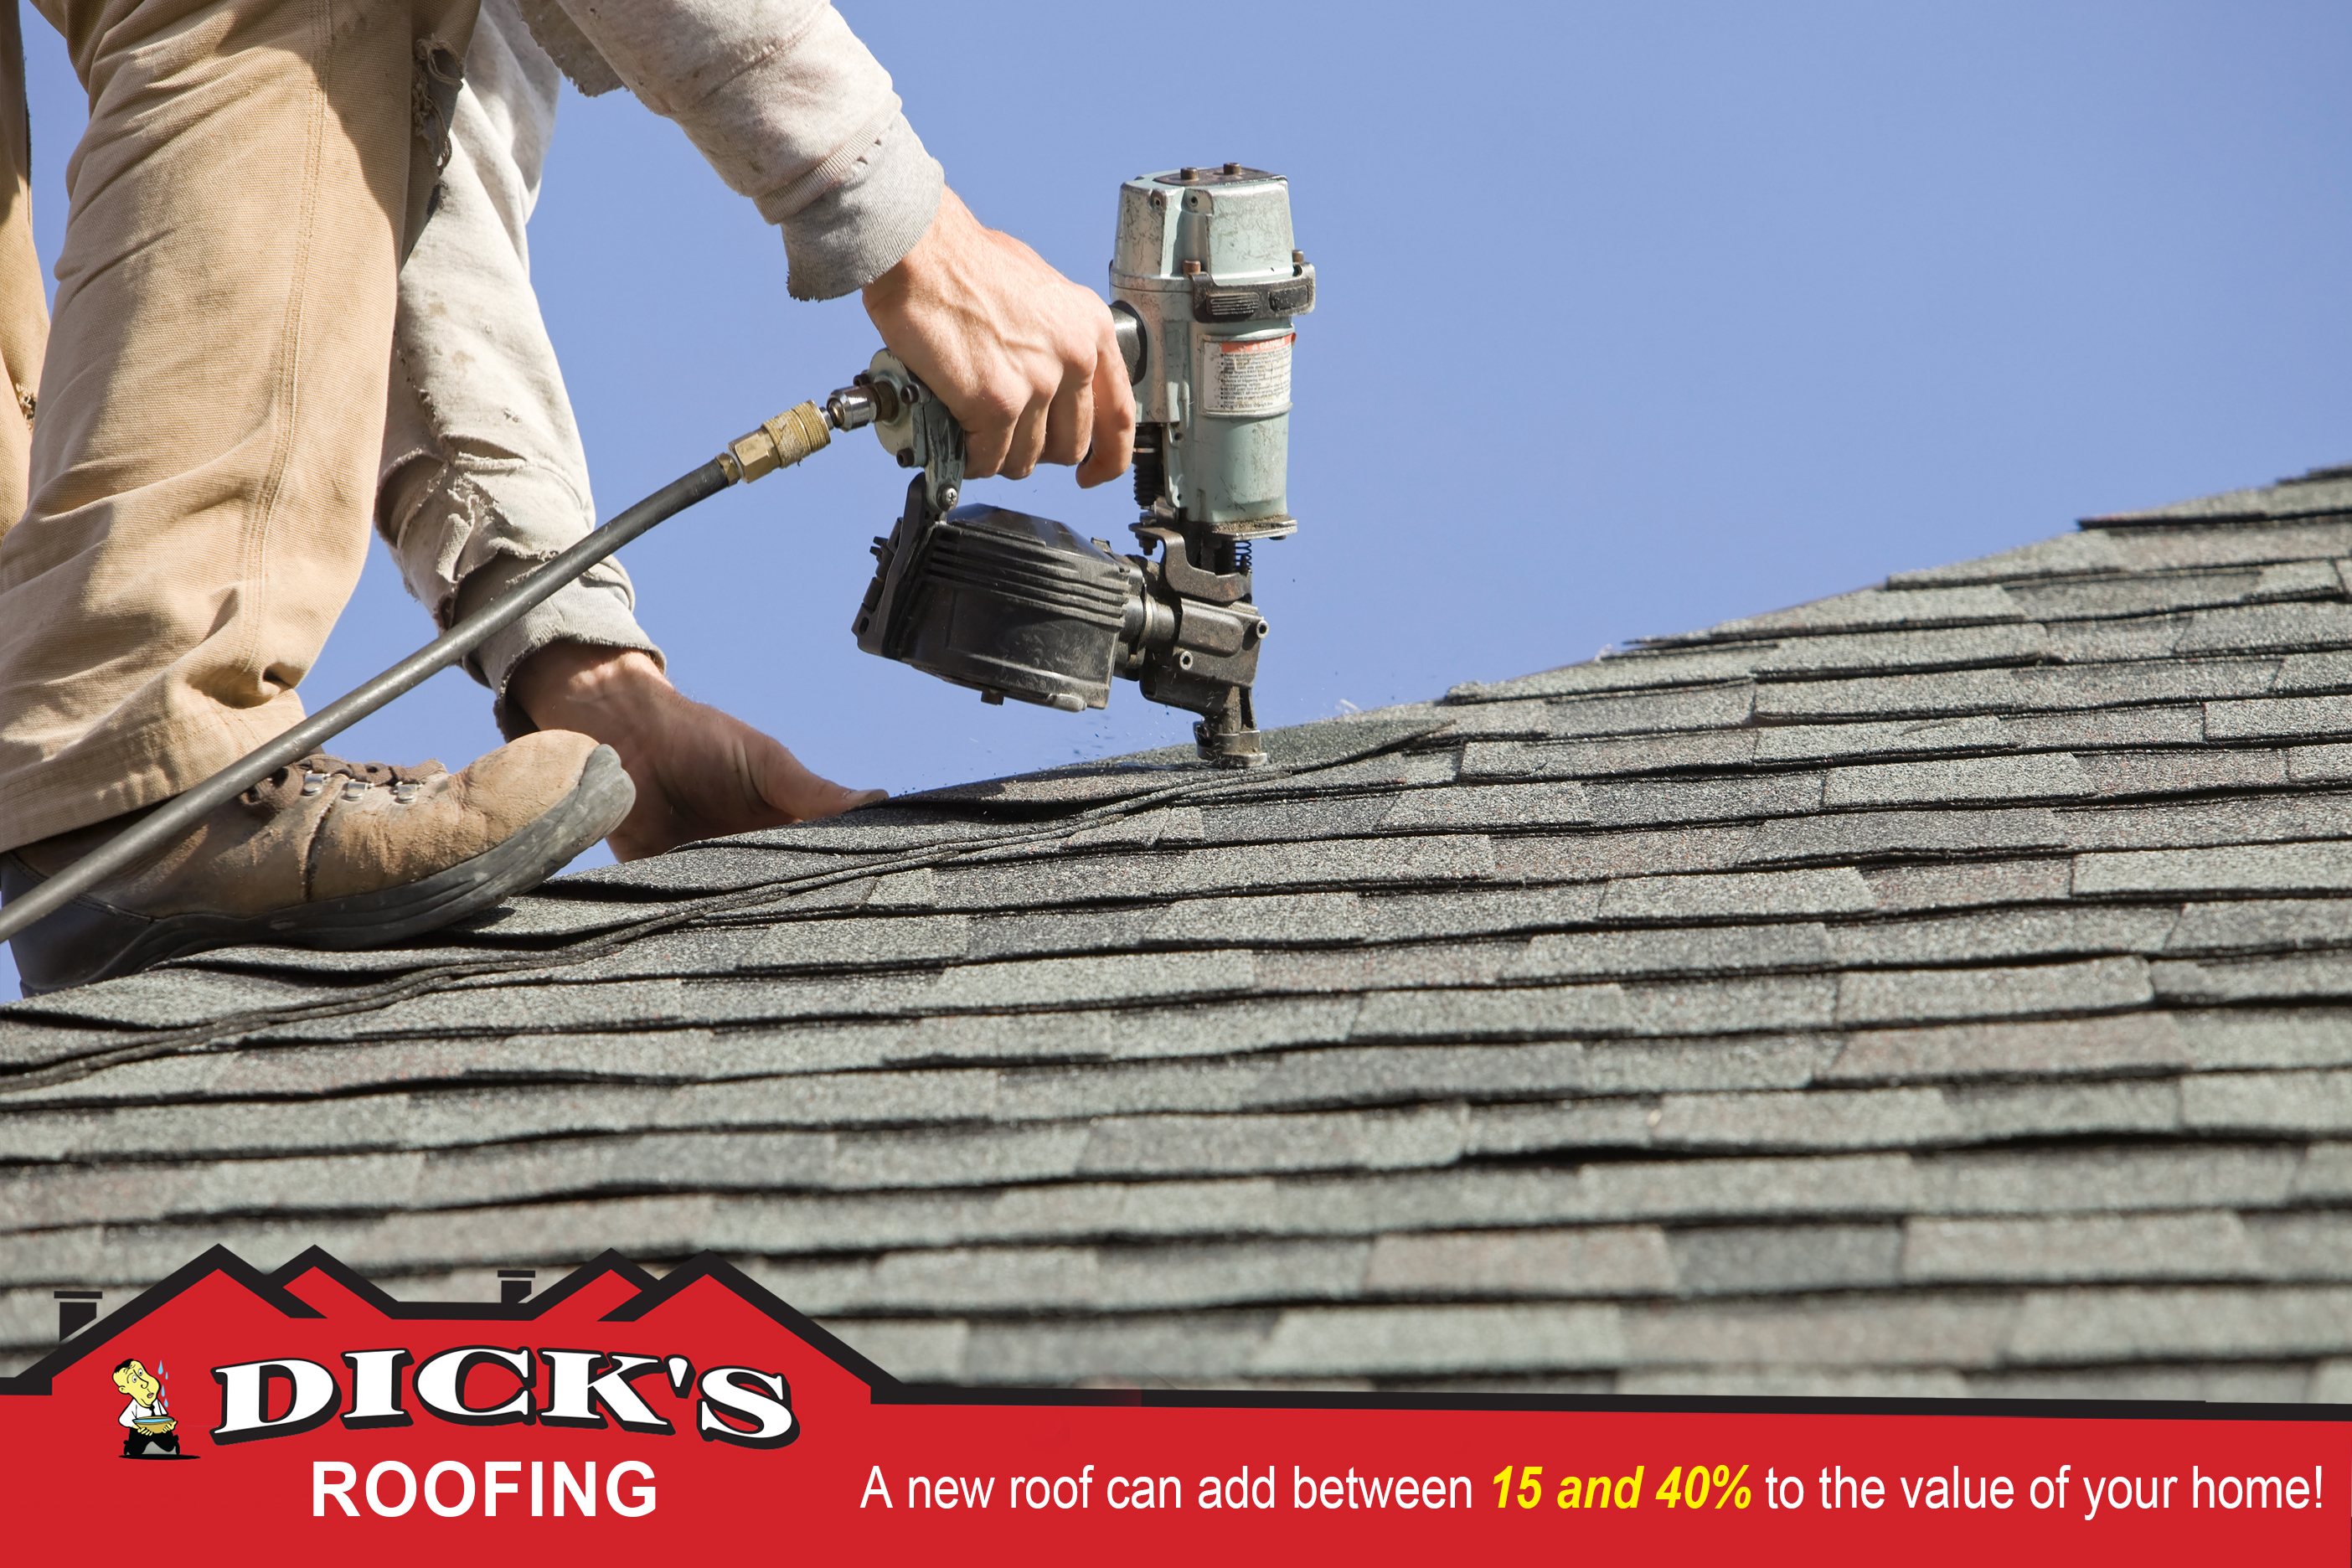 Save Money with a New Roof | Dick's Roofing